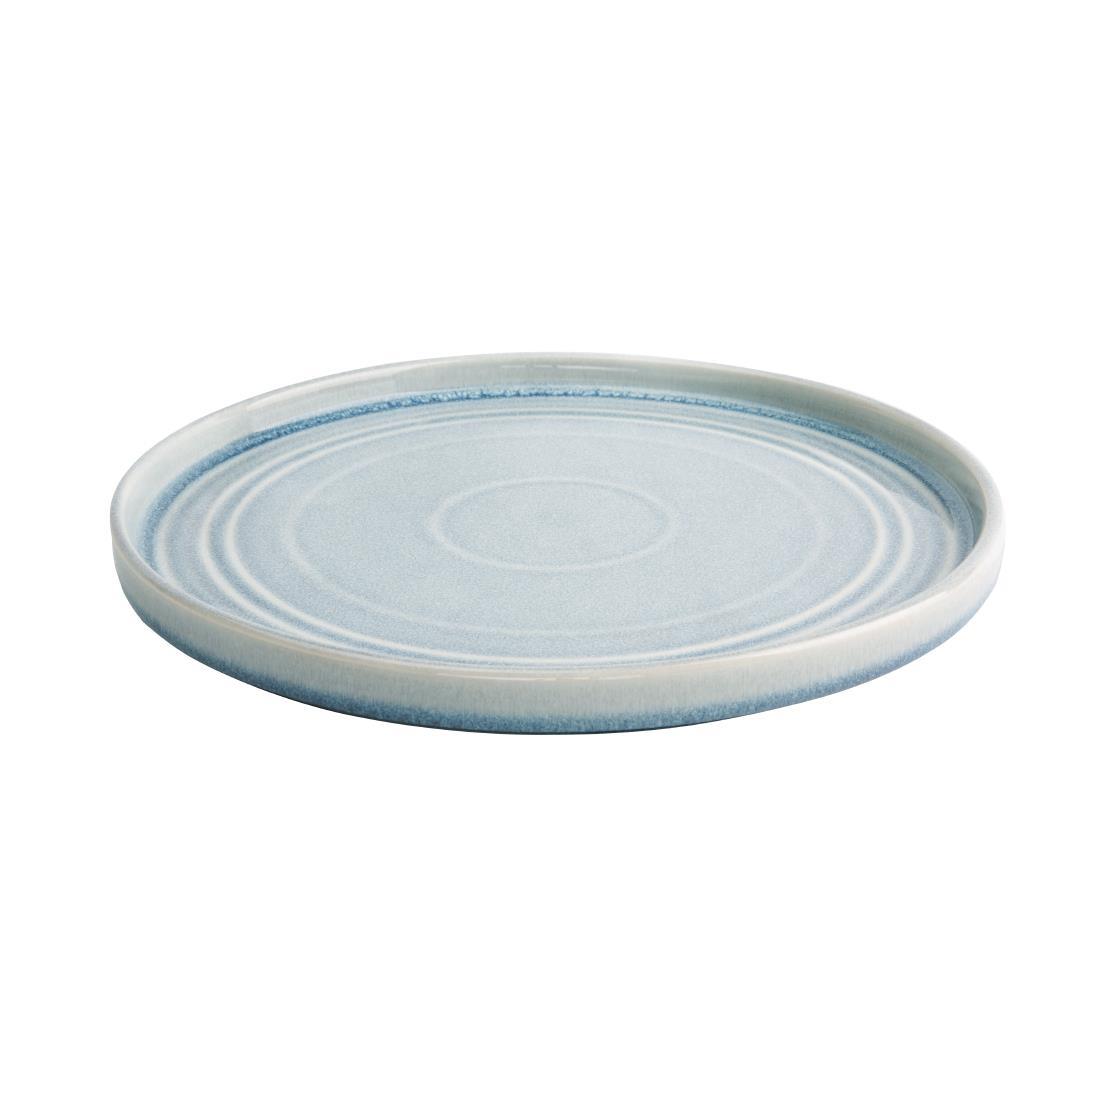 Olympia Cavolo Flat Round Plates Ice Blue 270mm (Pack of 4) - FB569  - 2